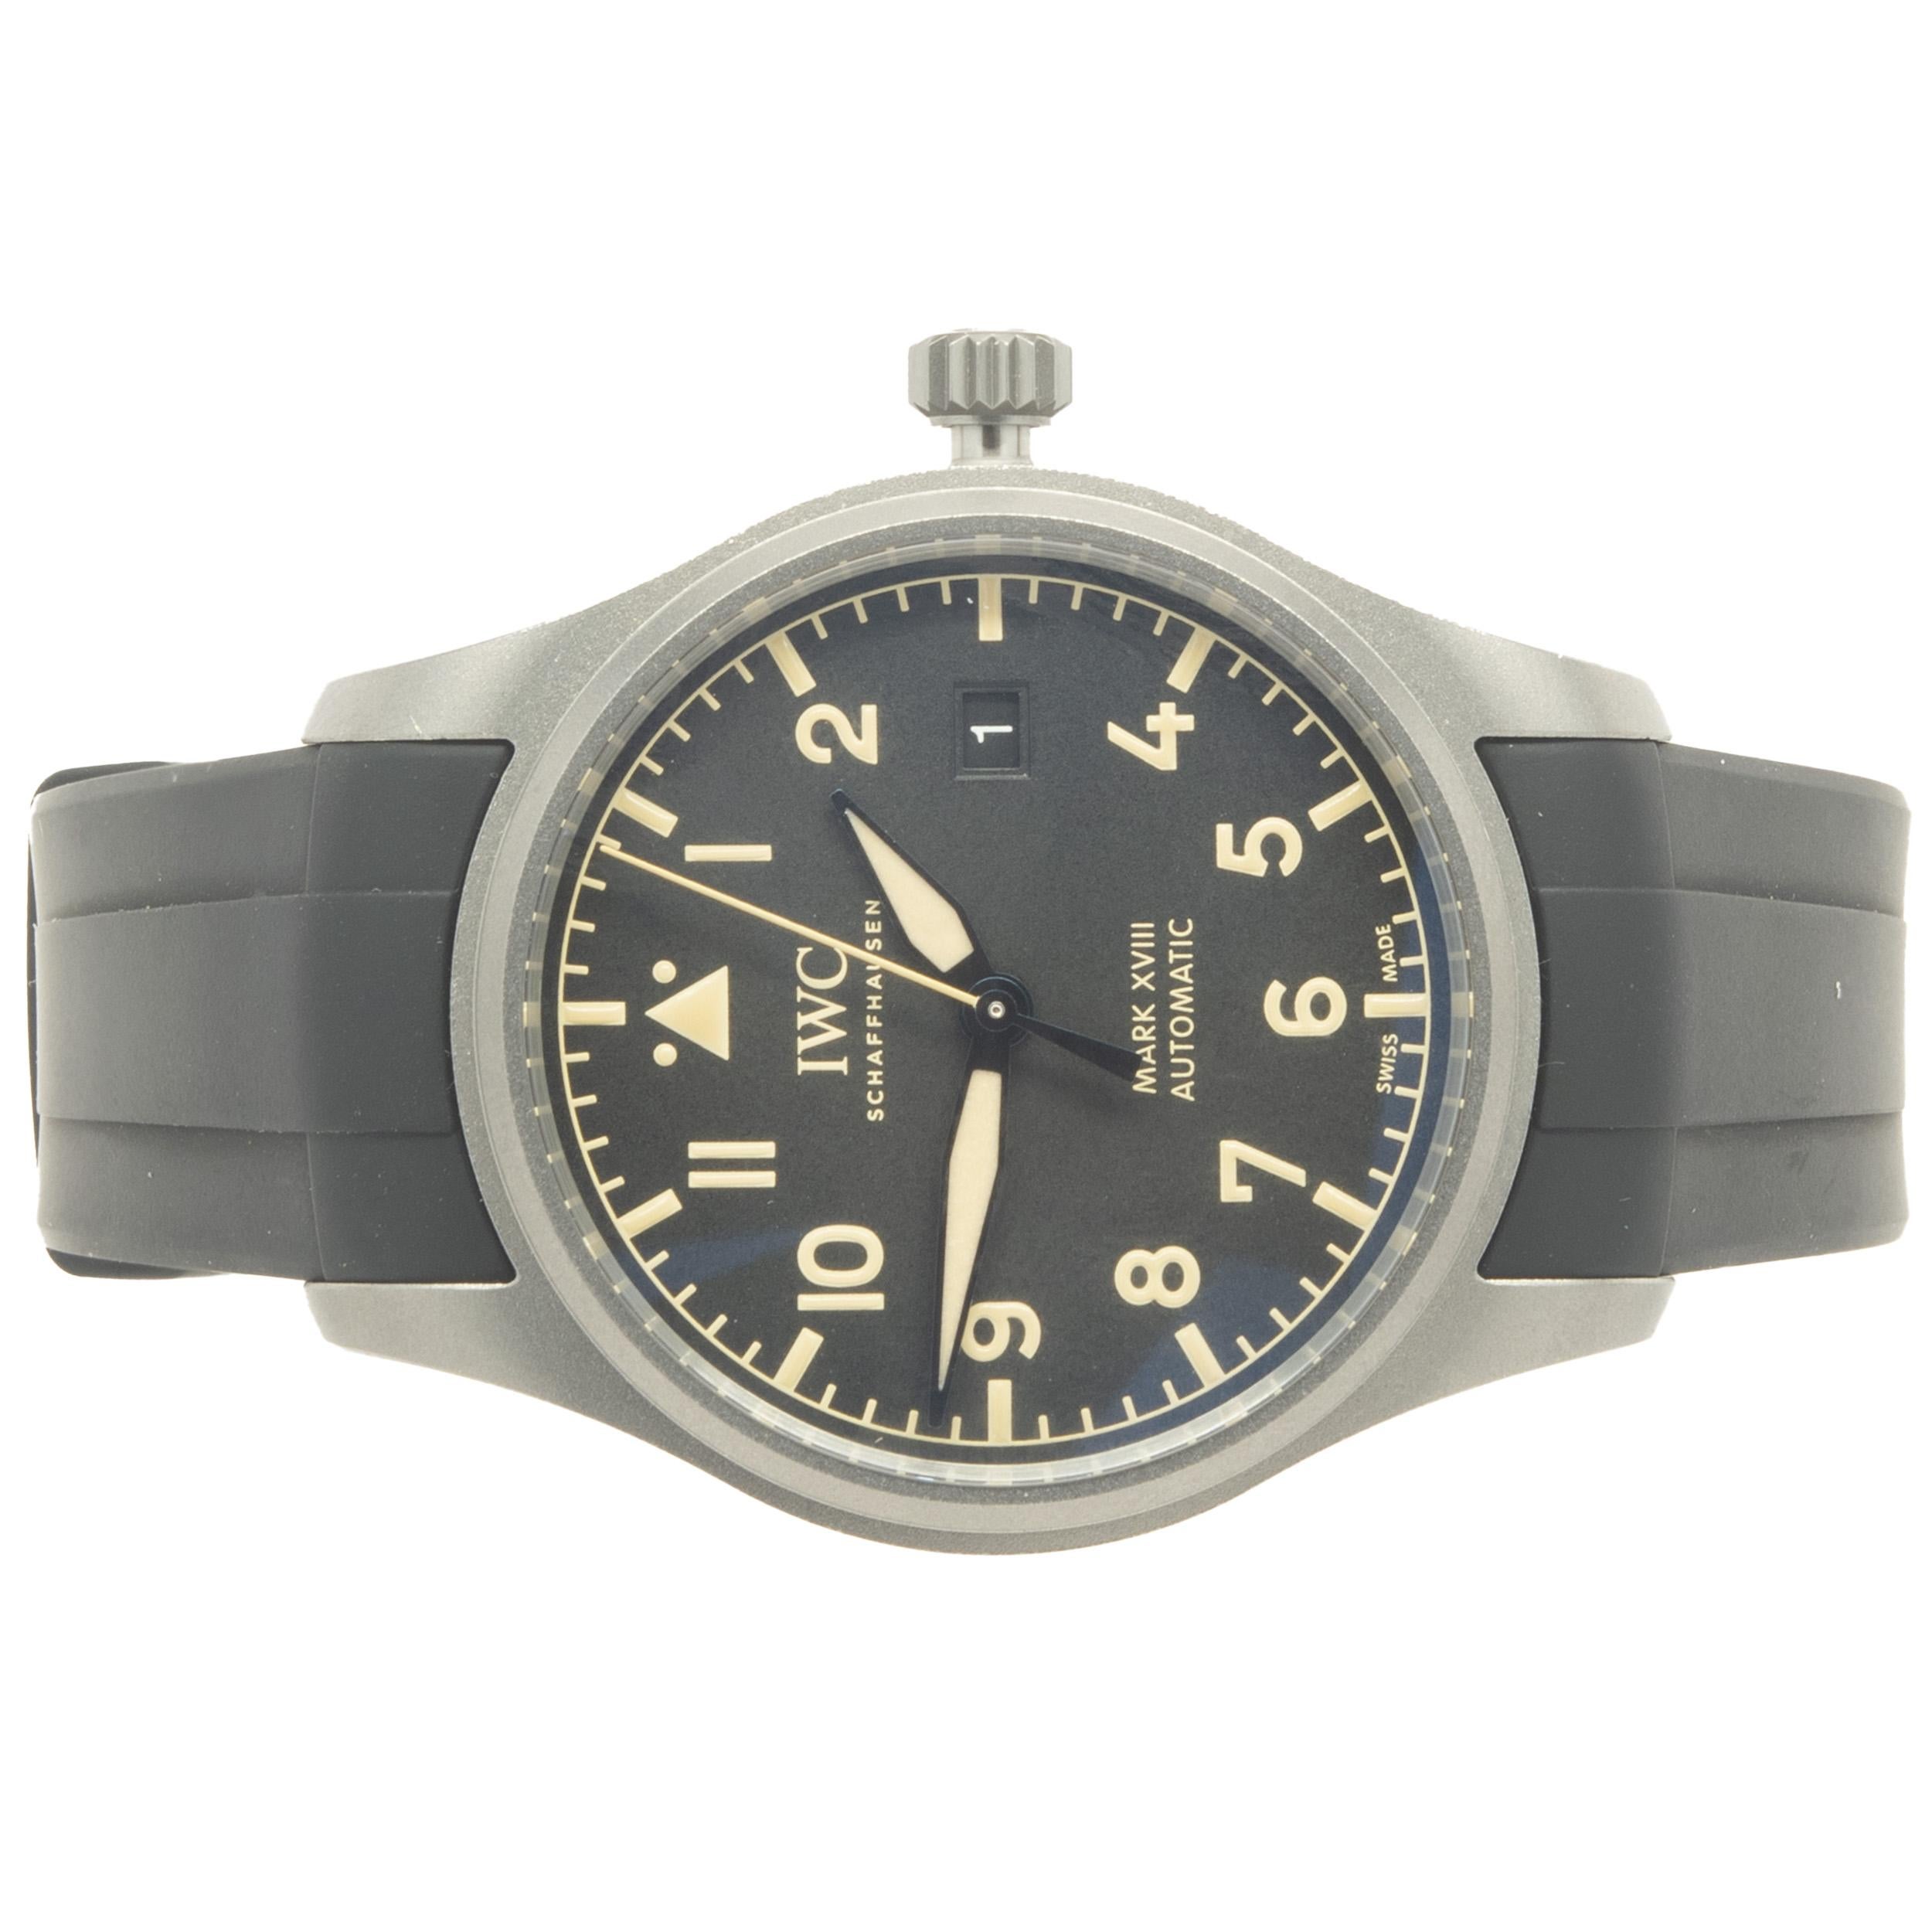 Brand: IWC
Movement: automatic
Function: hours, minutes, seconds, date
Case: 40mm round case, sapphire crystal, push/pull crown
Band: black rubber strap, buckle
Dial: black arabic
Reference #: IW327006
Serial #: 6262XXX
Complete with box and